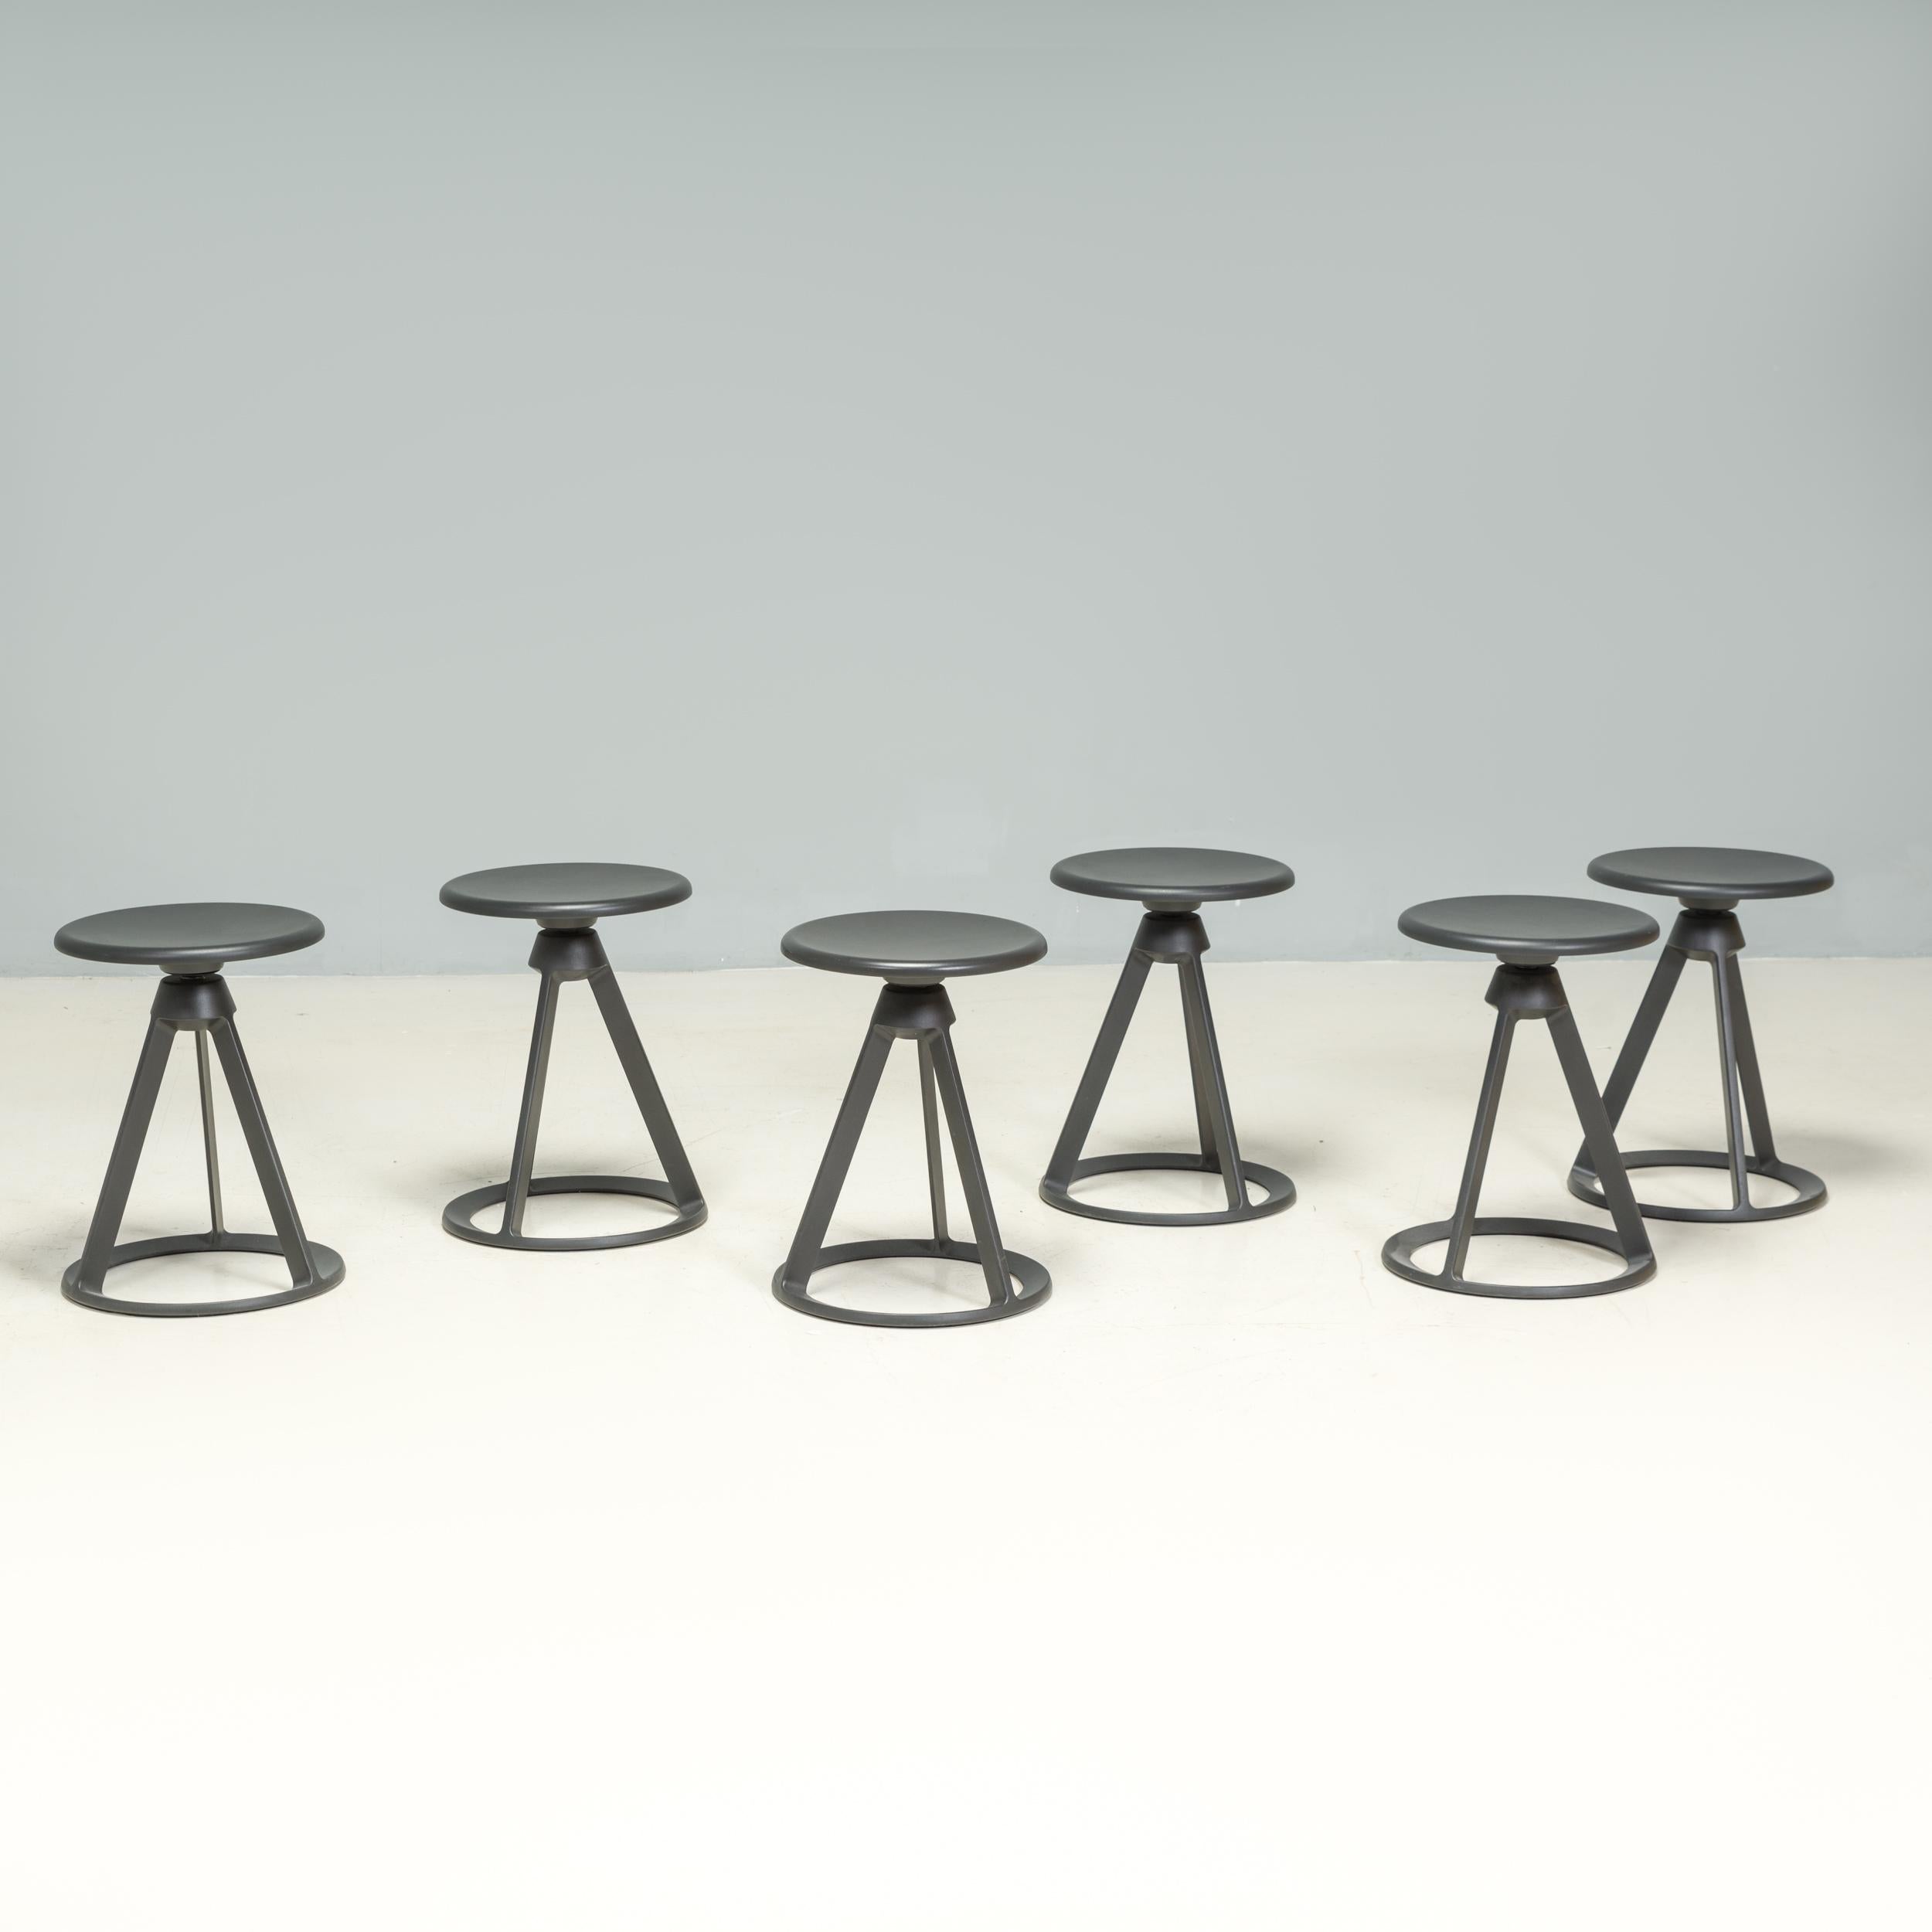 Originally designed by Edward Barber and Jay Osgerby for Knoll in 2015, the Piton stool is a fantastic example of contemporary furniture design.

Perfectly balancing style and practicality, this set of fixed height swivel stools feature a tripod